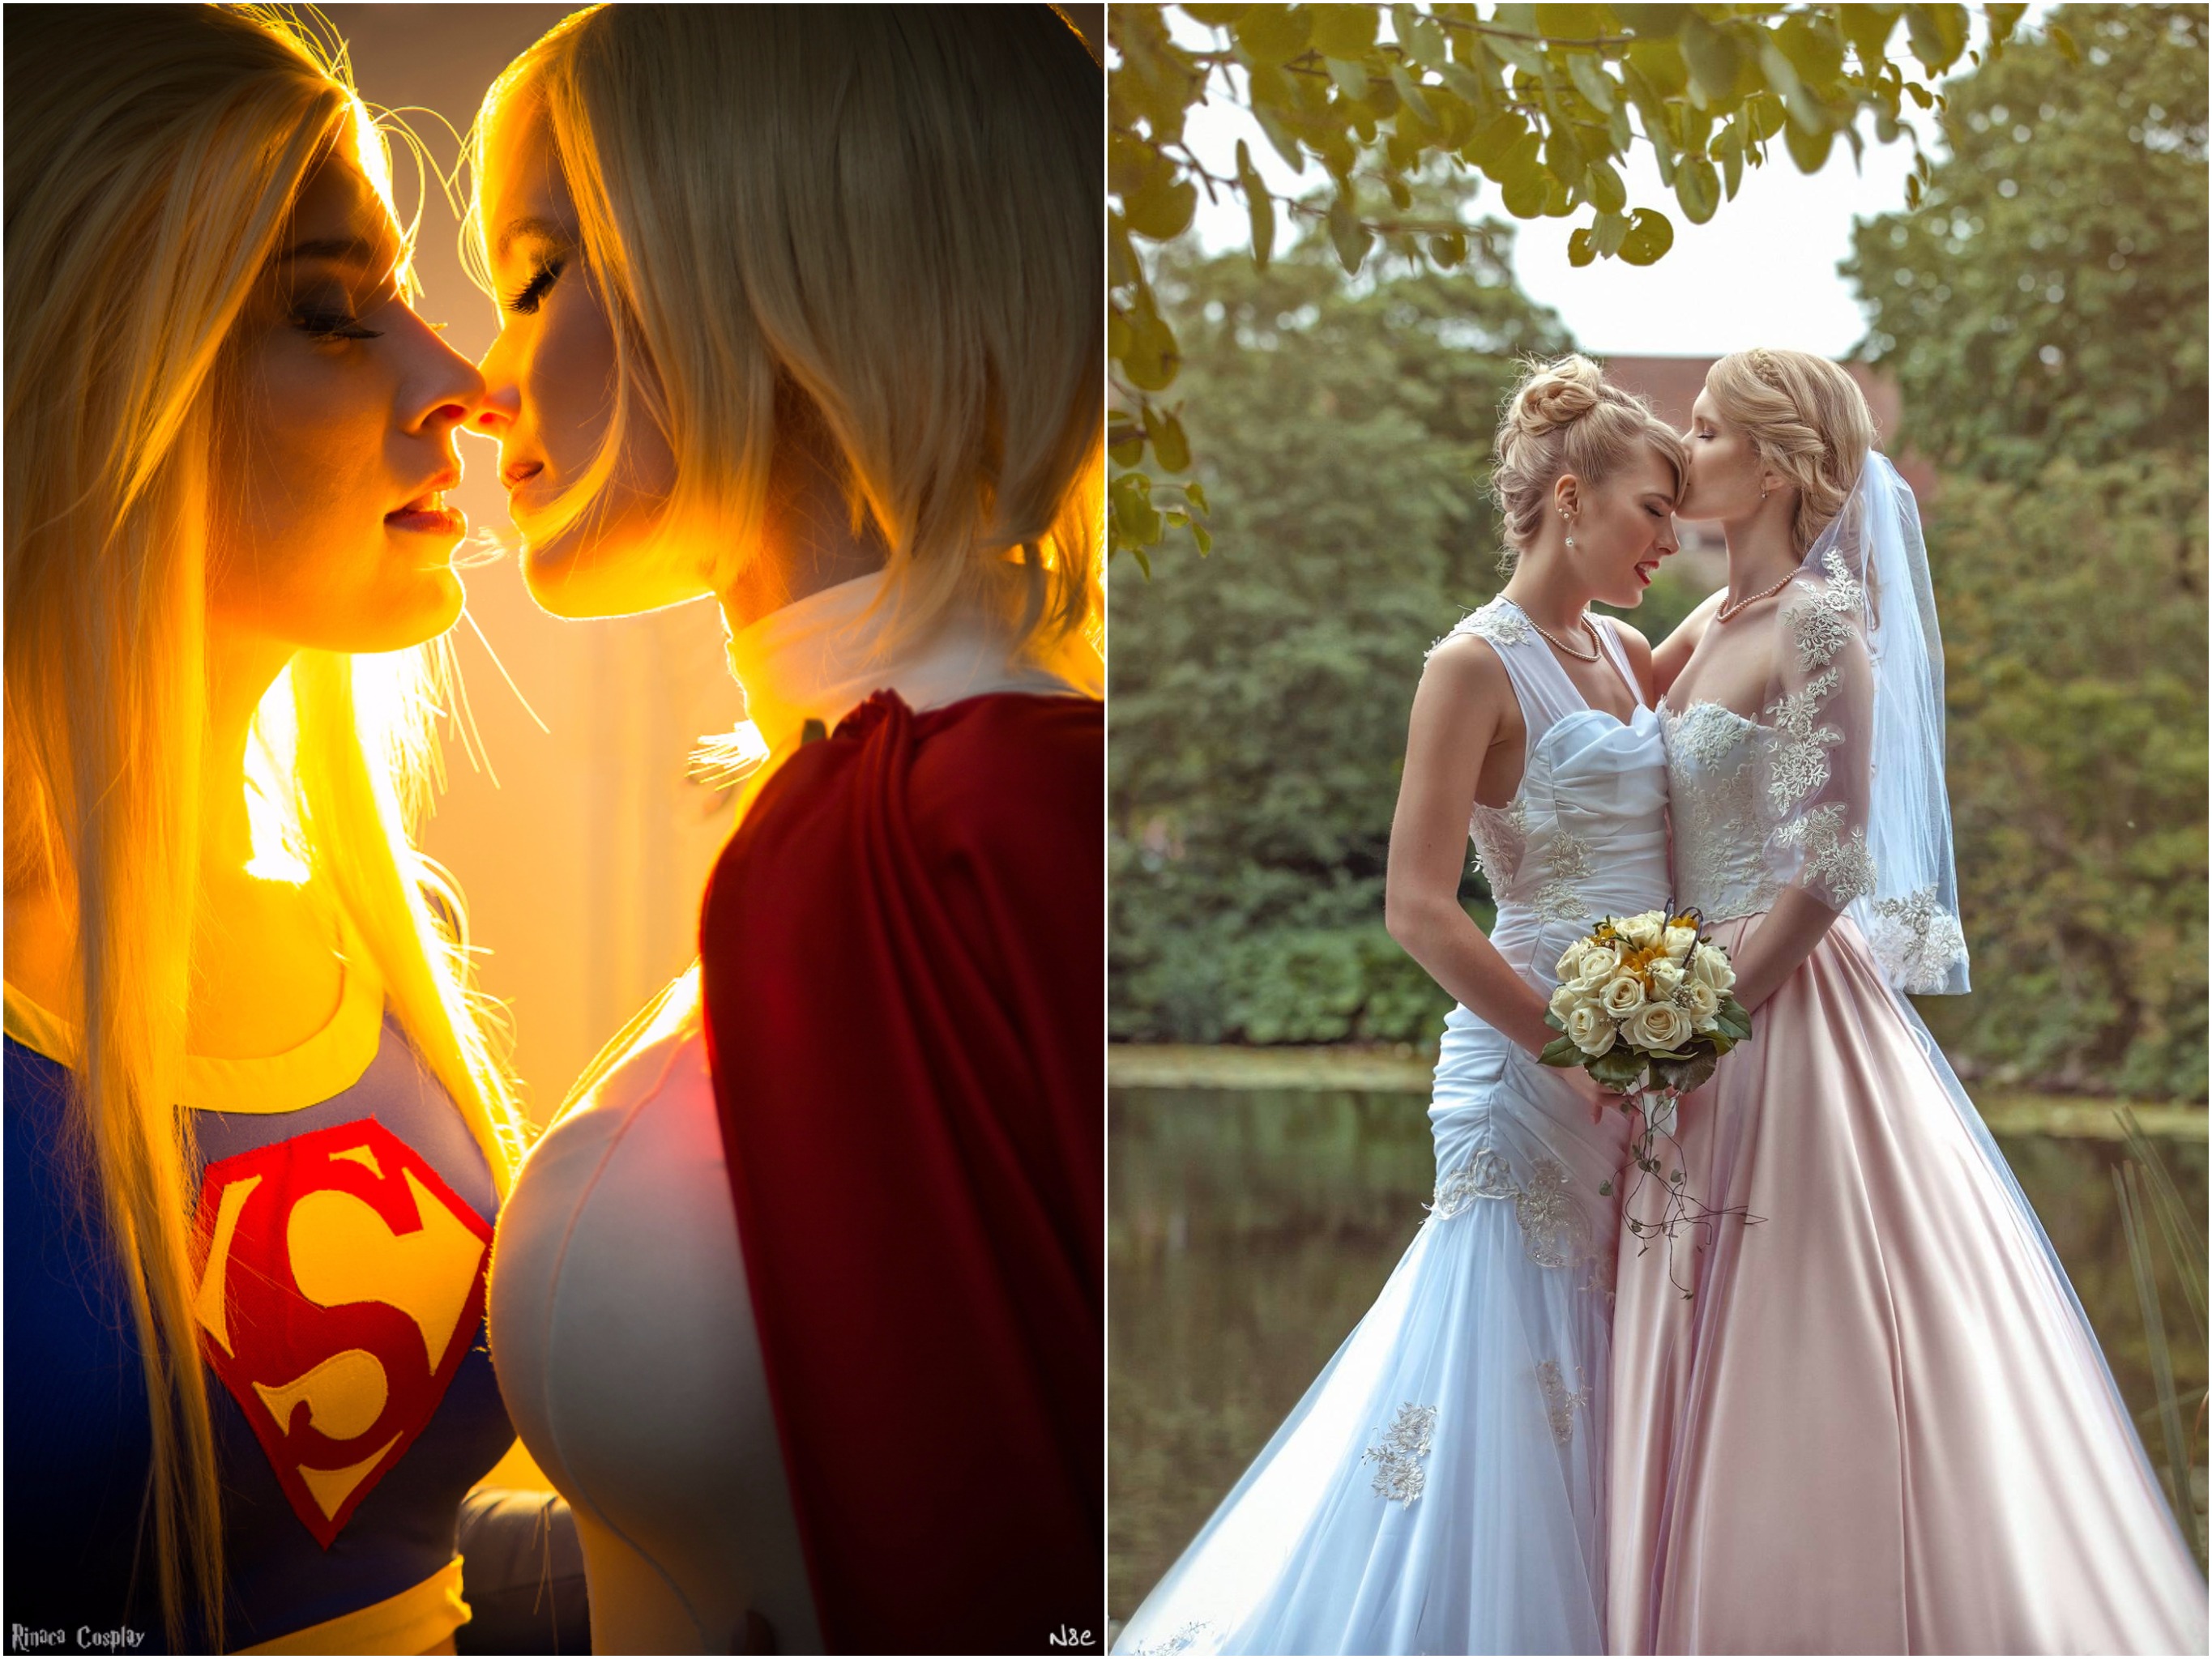 BTW: Comparing Powergirl's rack to the wedding photos... I call shenanigans.